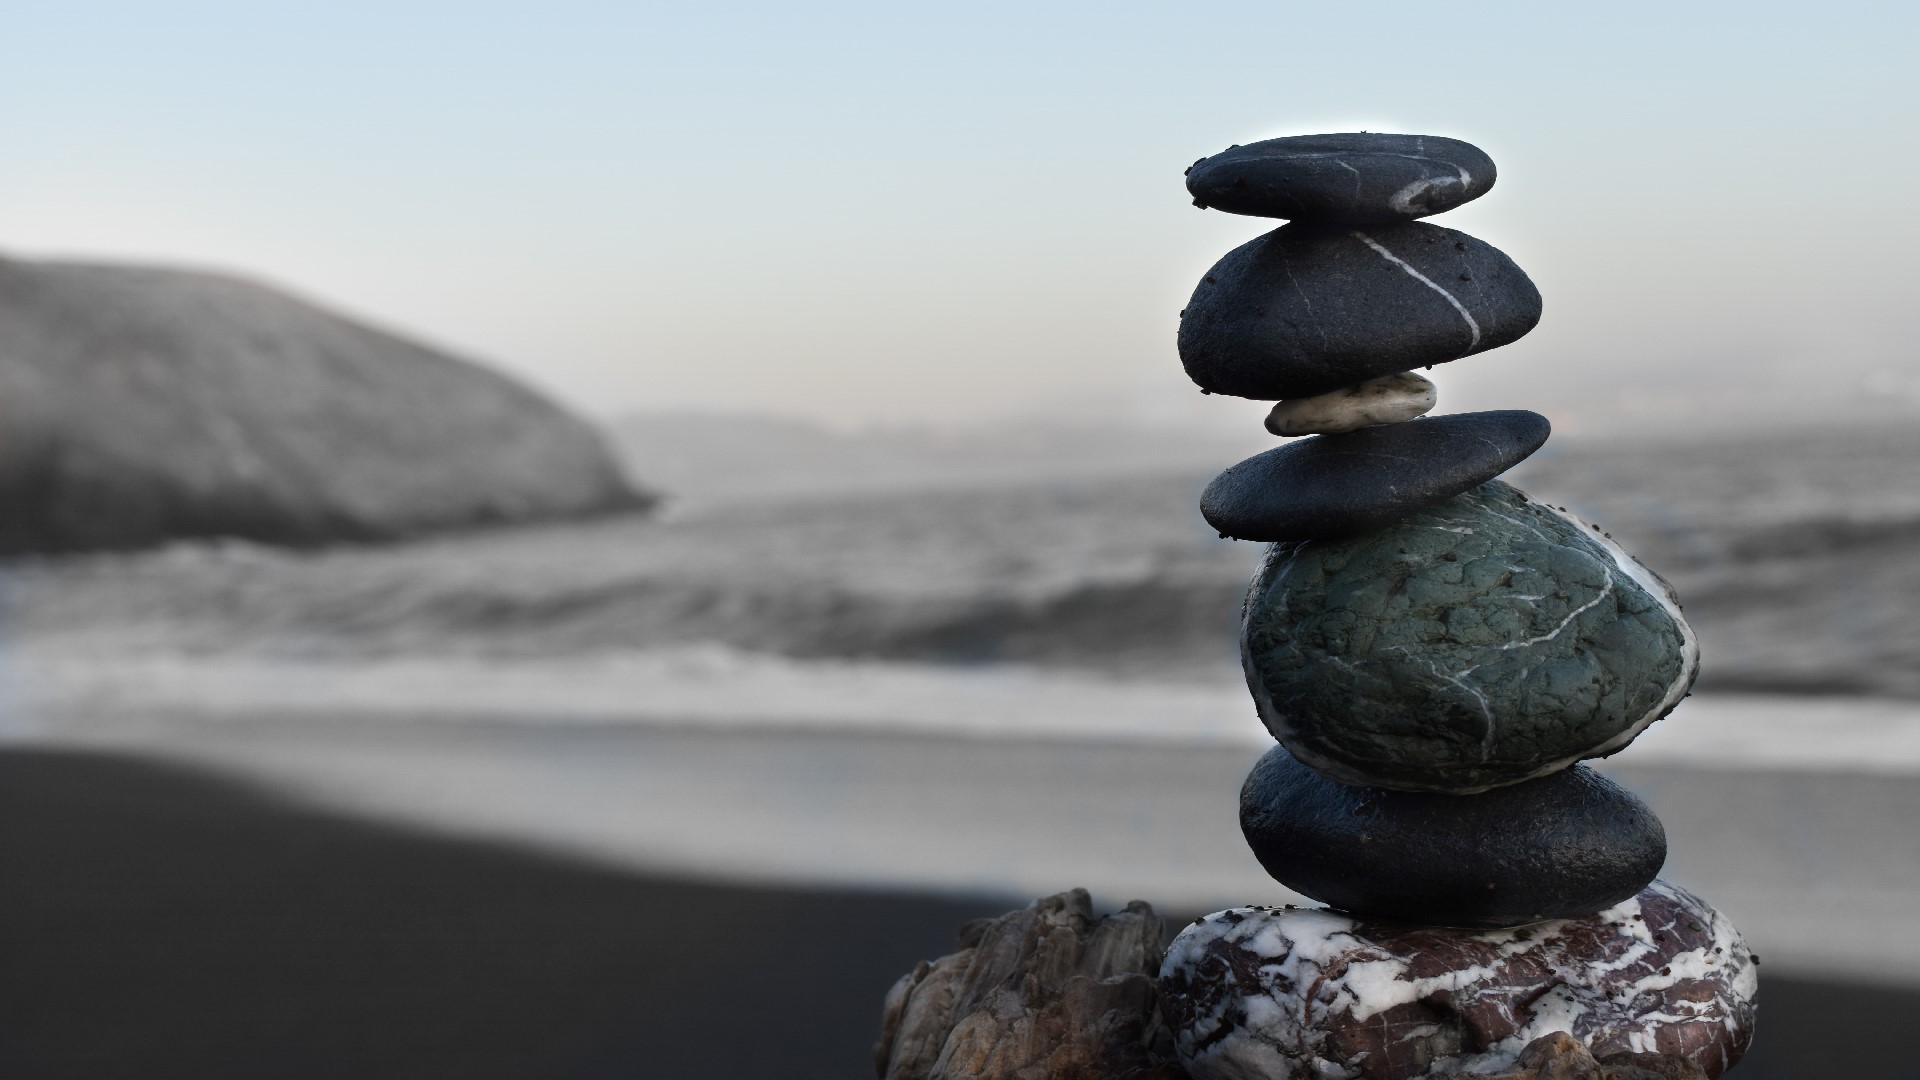 An Image of multiple stones stacked on top of each other